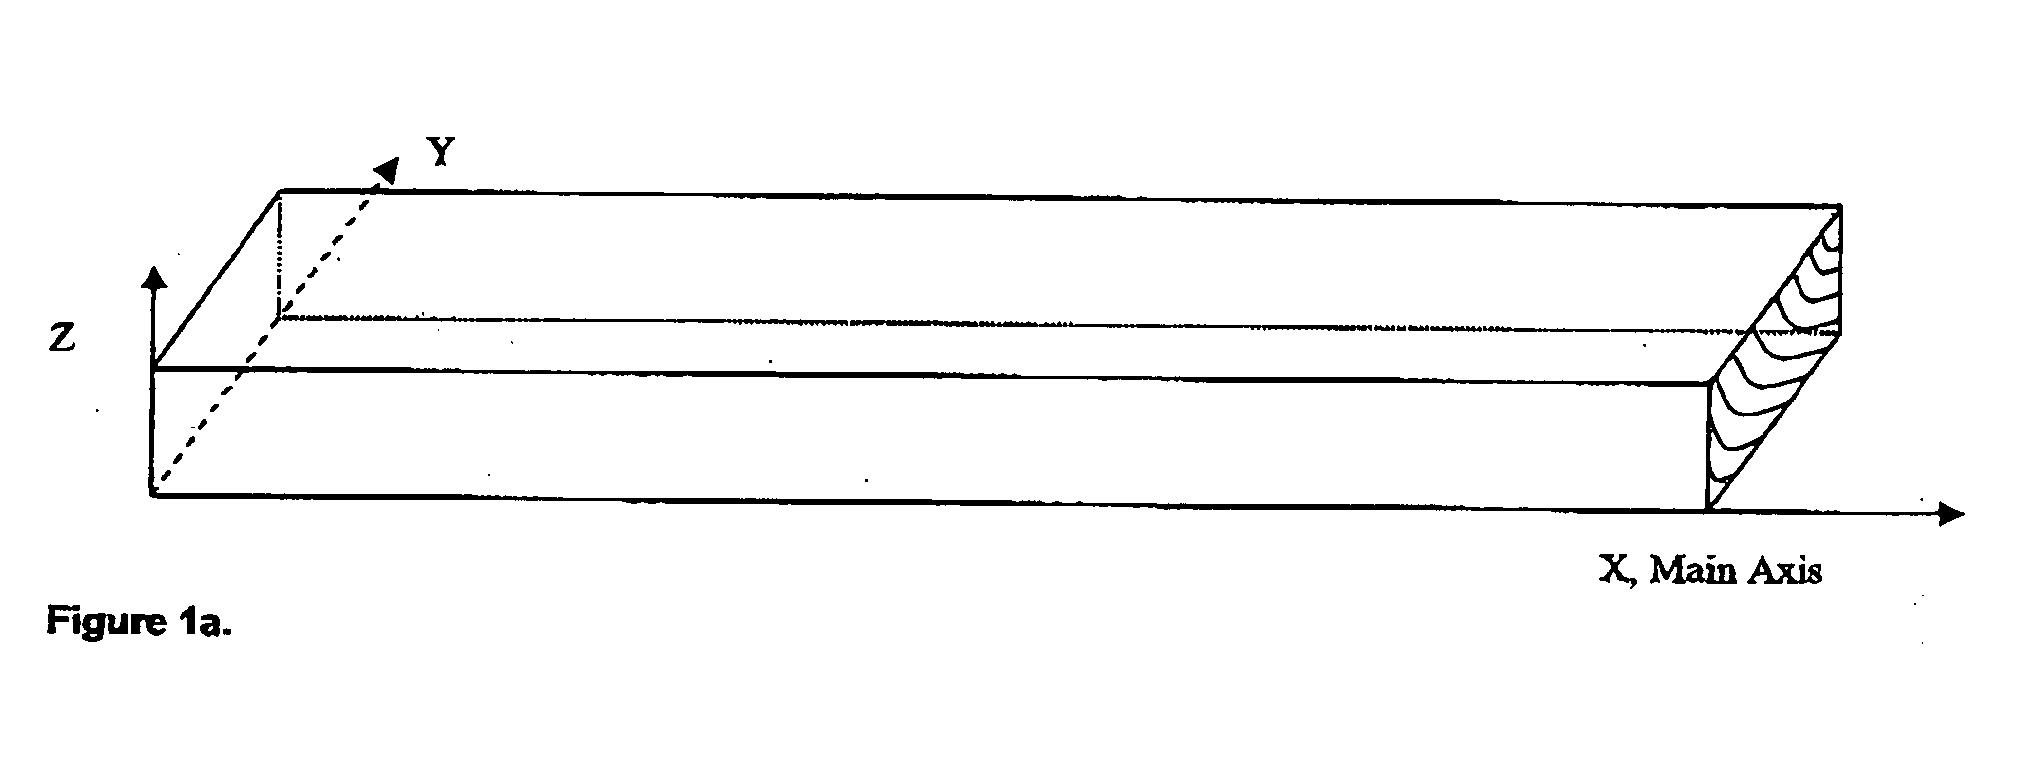 Method of wood strength and stiffness prediction